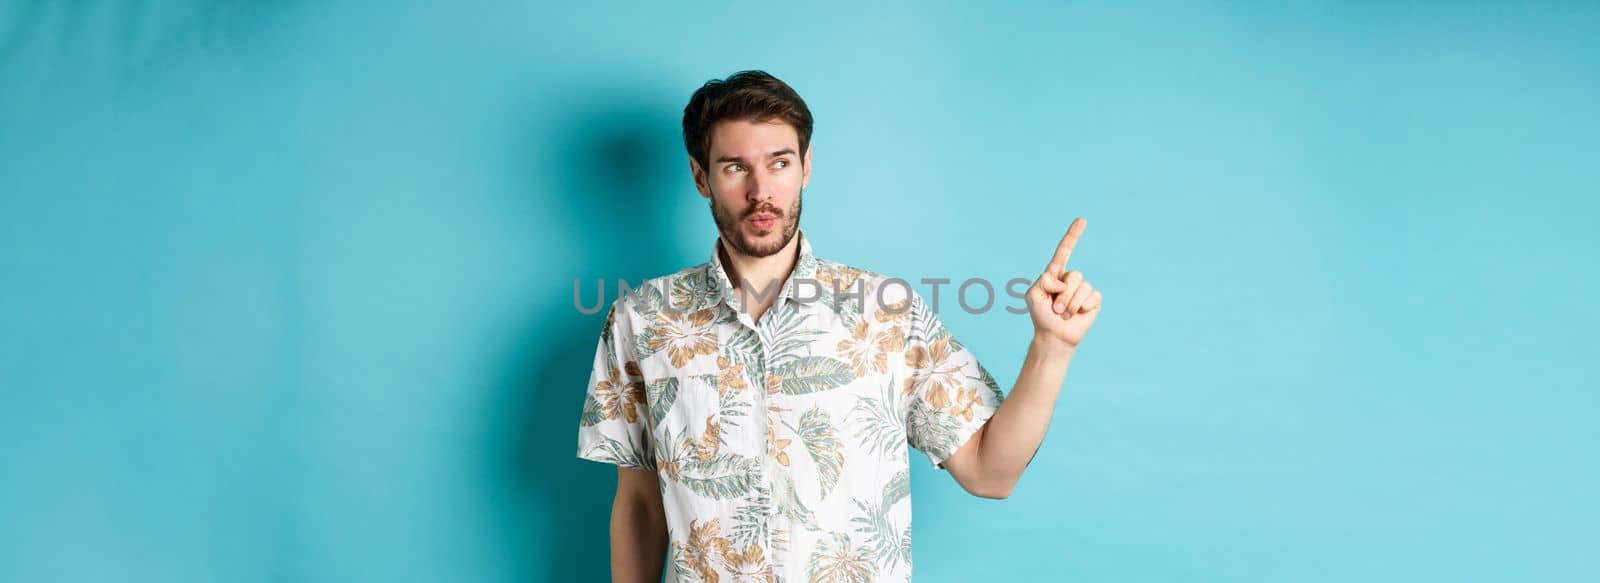 Handsome guy wearing summer shirt on vacation, pointing and looking aside at empty space, making amazed face, standing on blue background.